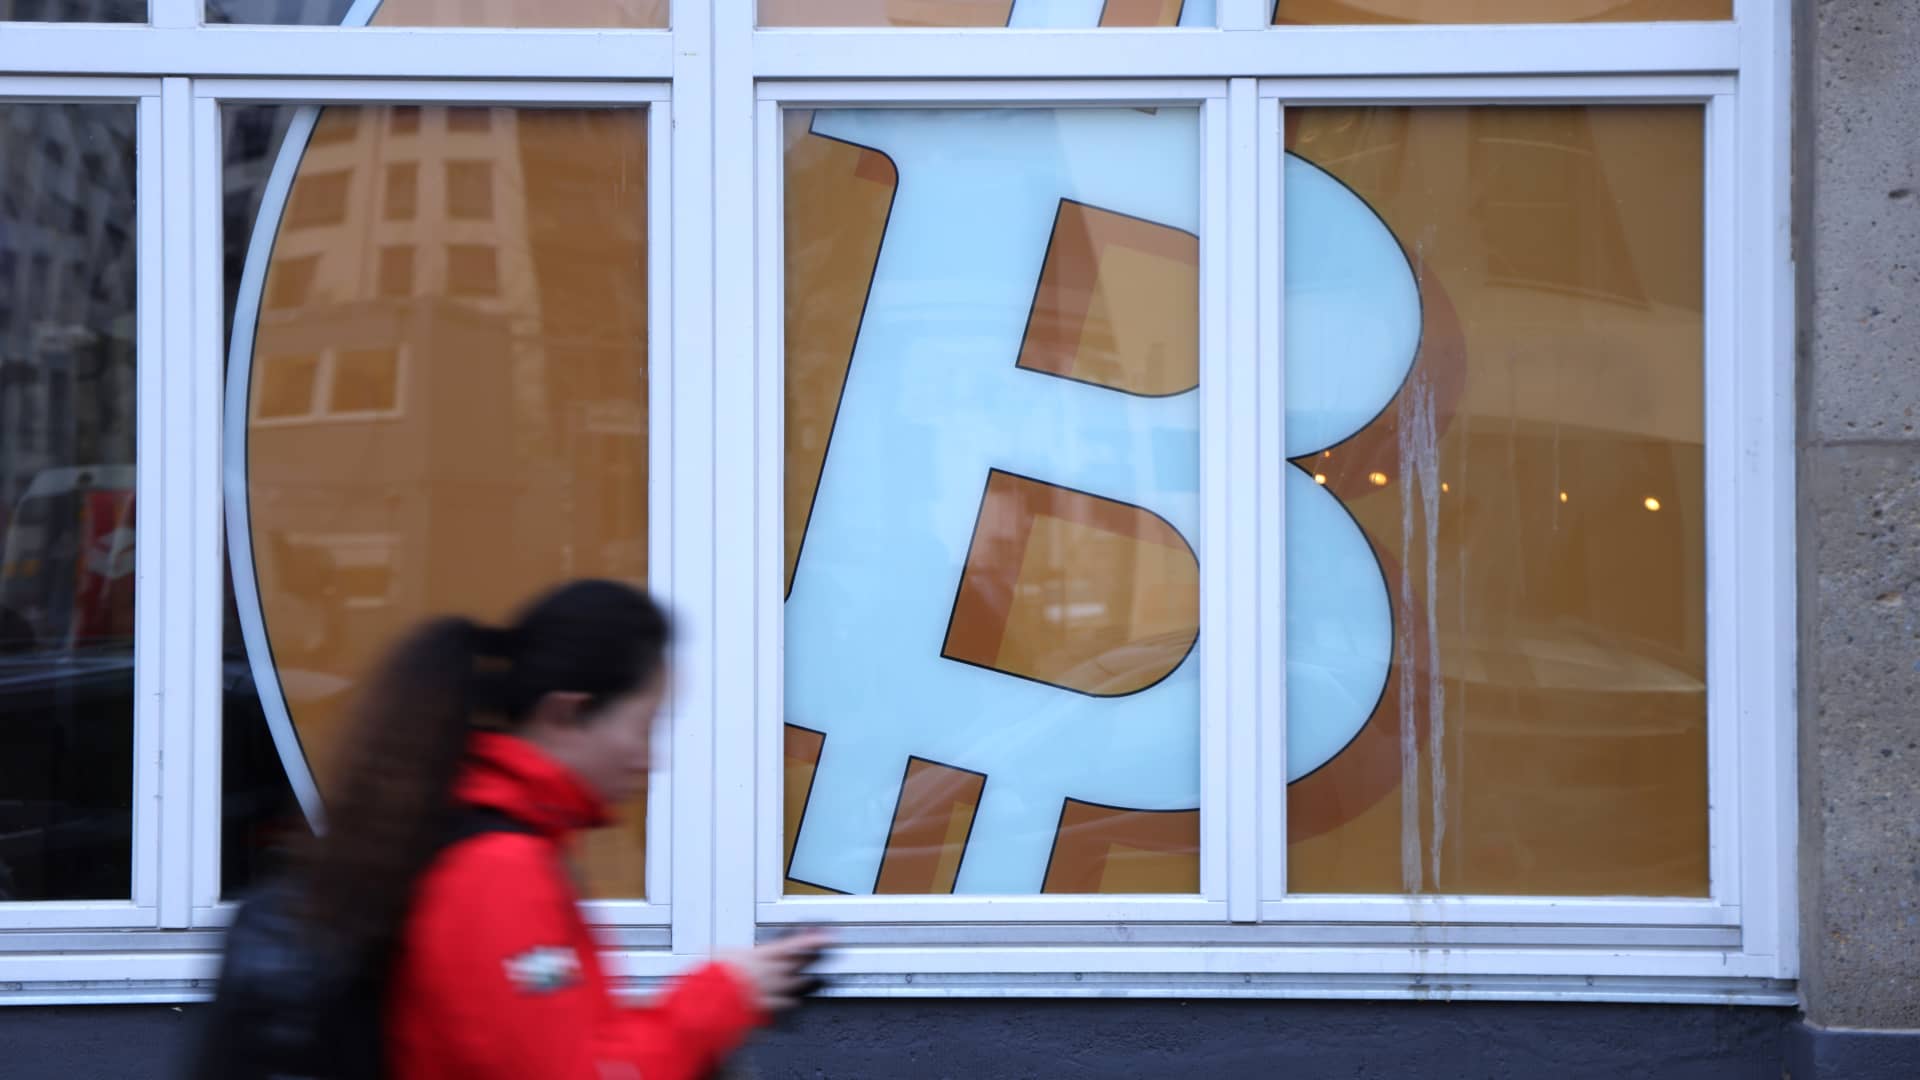 Bitcoin rises after snapping longest ever losing streak as investors seek a market bottom